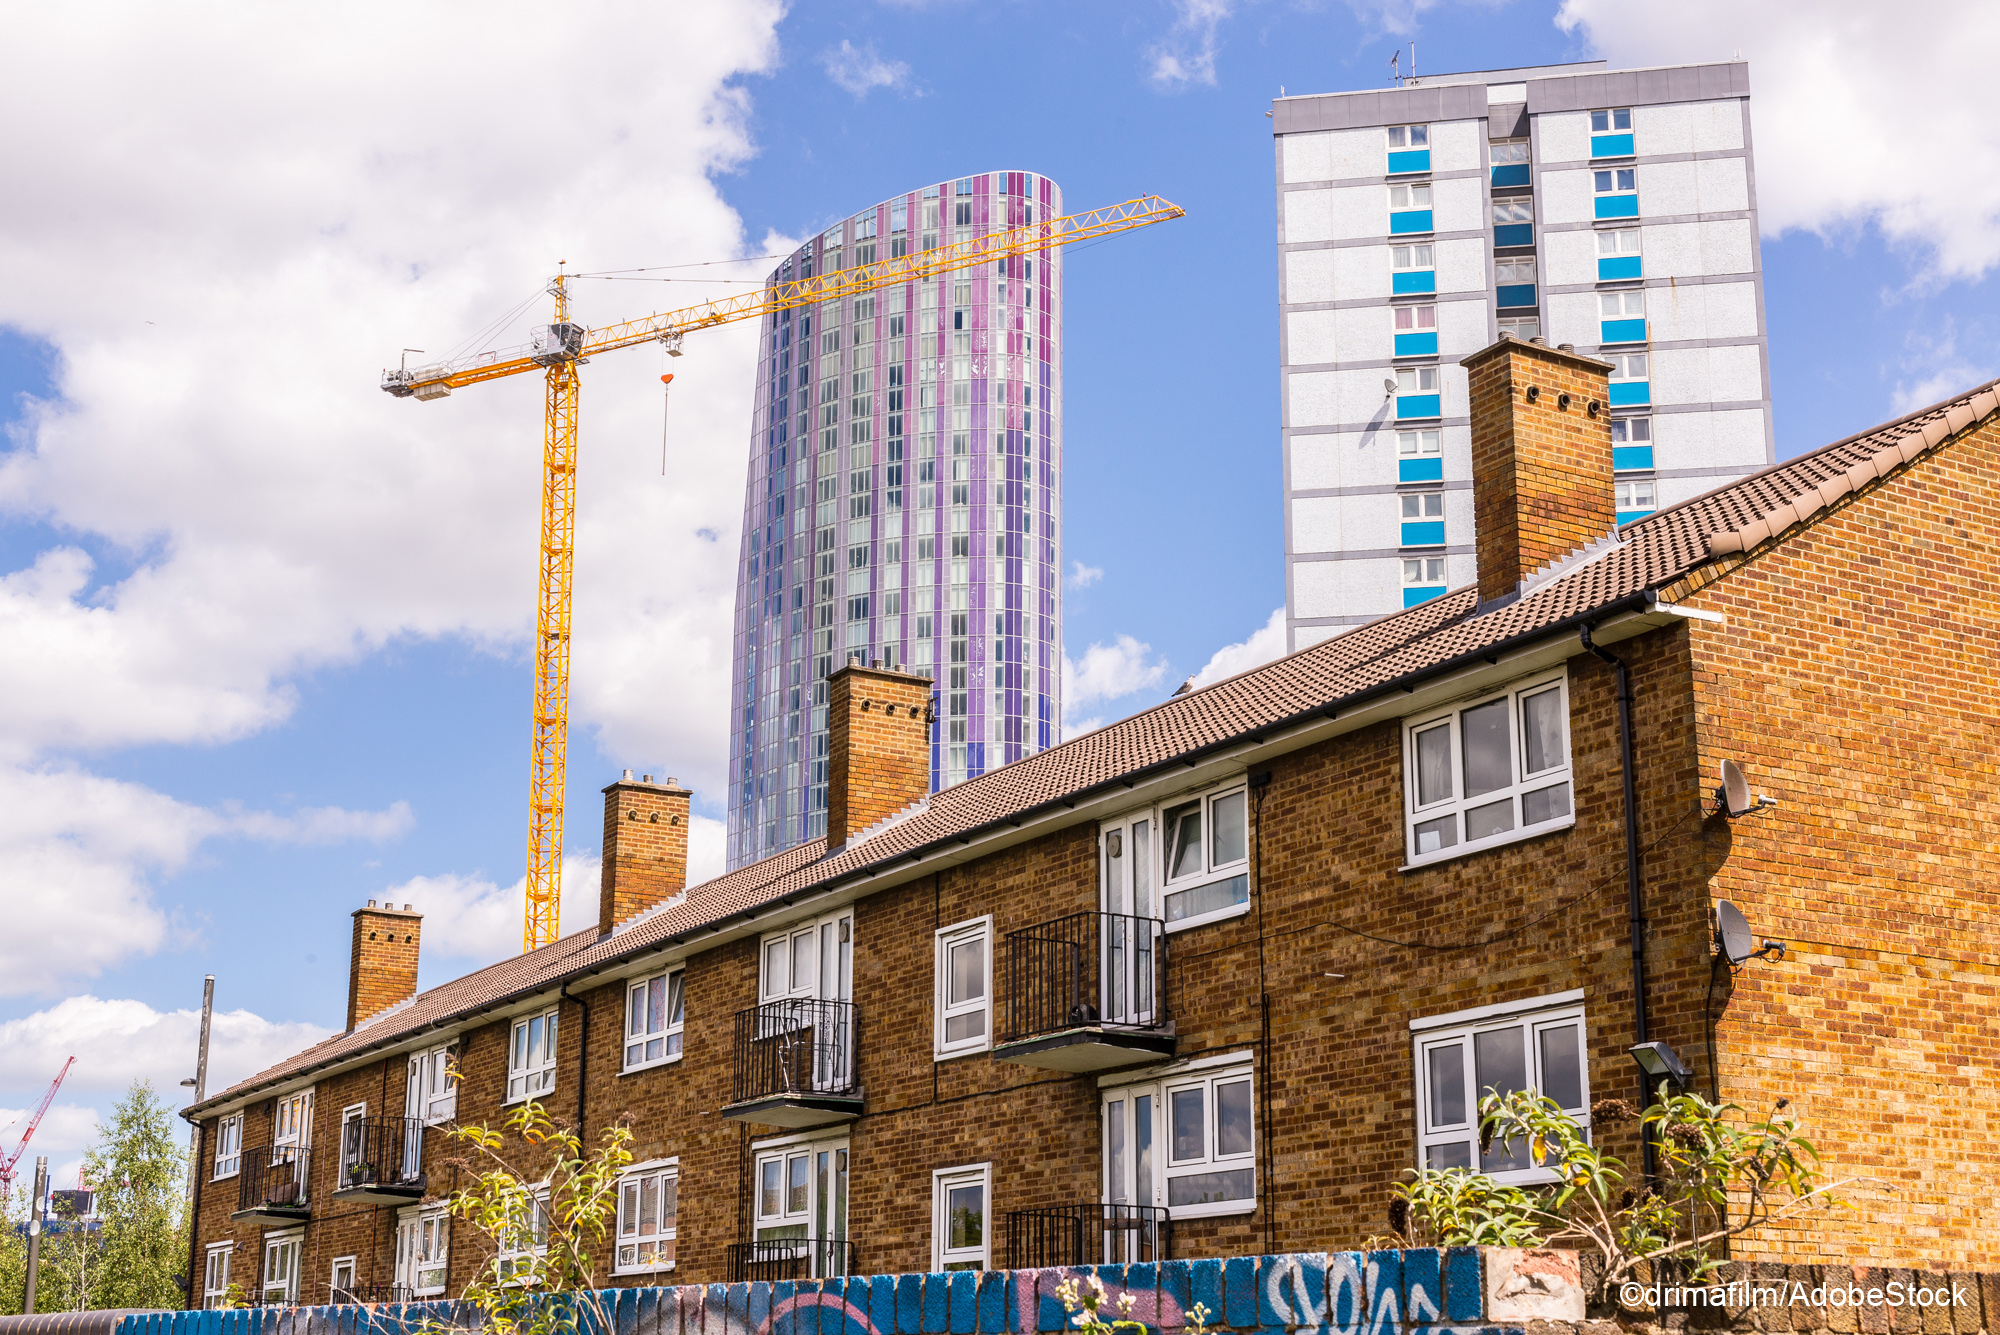 LGA responds to government consultation regarding toughening rules on building safety